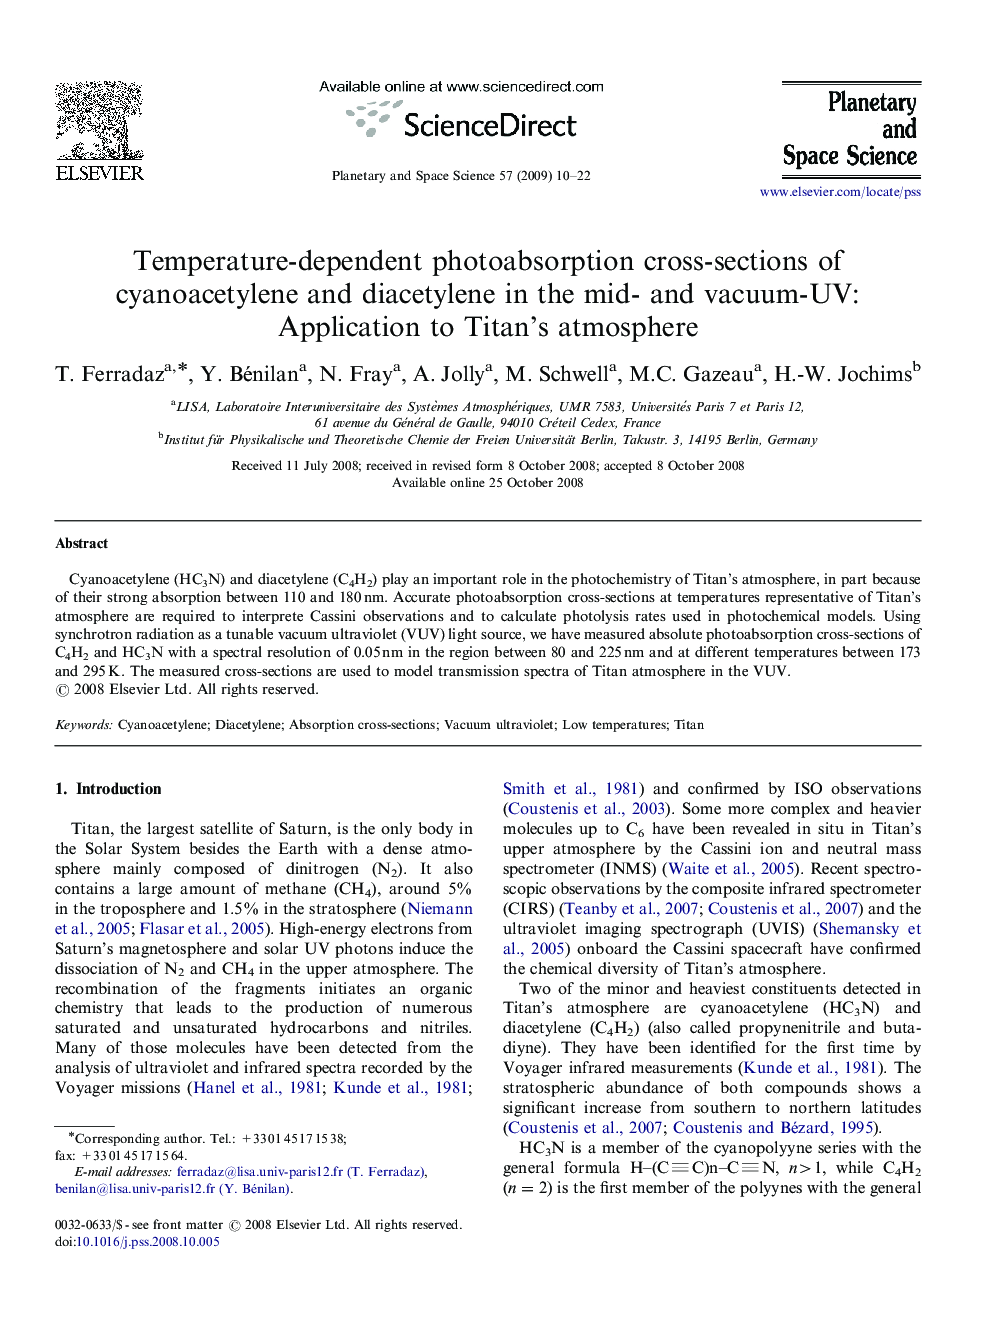 Temperature-dependent photoabsorption cross-sections of cyanoacetylene and diacetylene in the mid- and vacuum-UV: Application to Titan's atmosphere